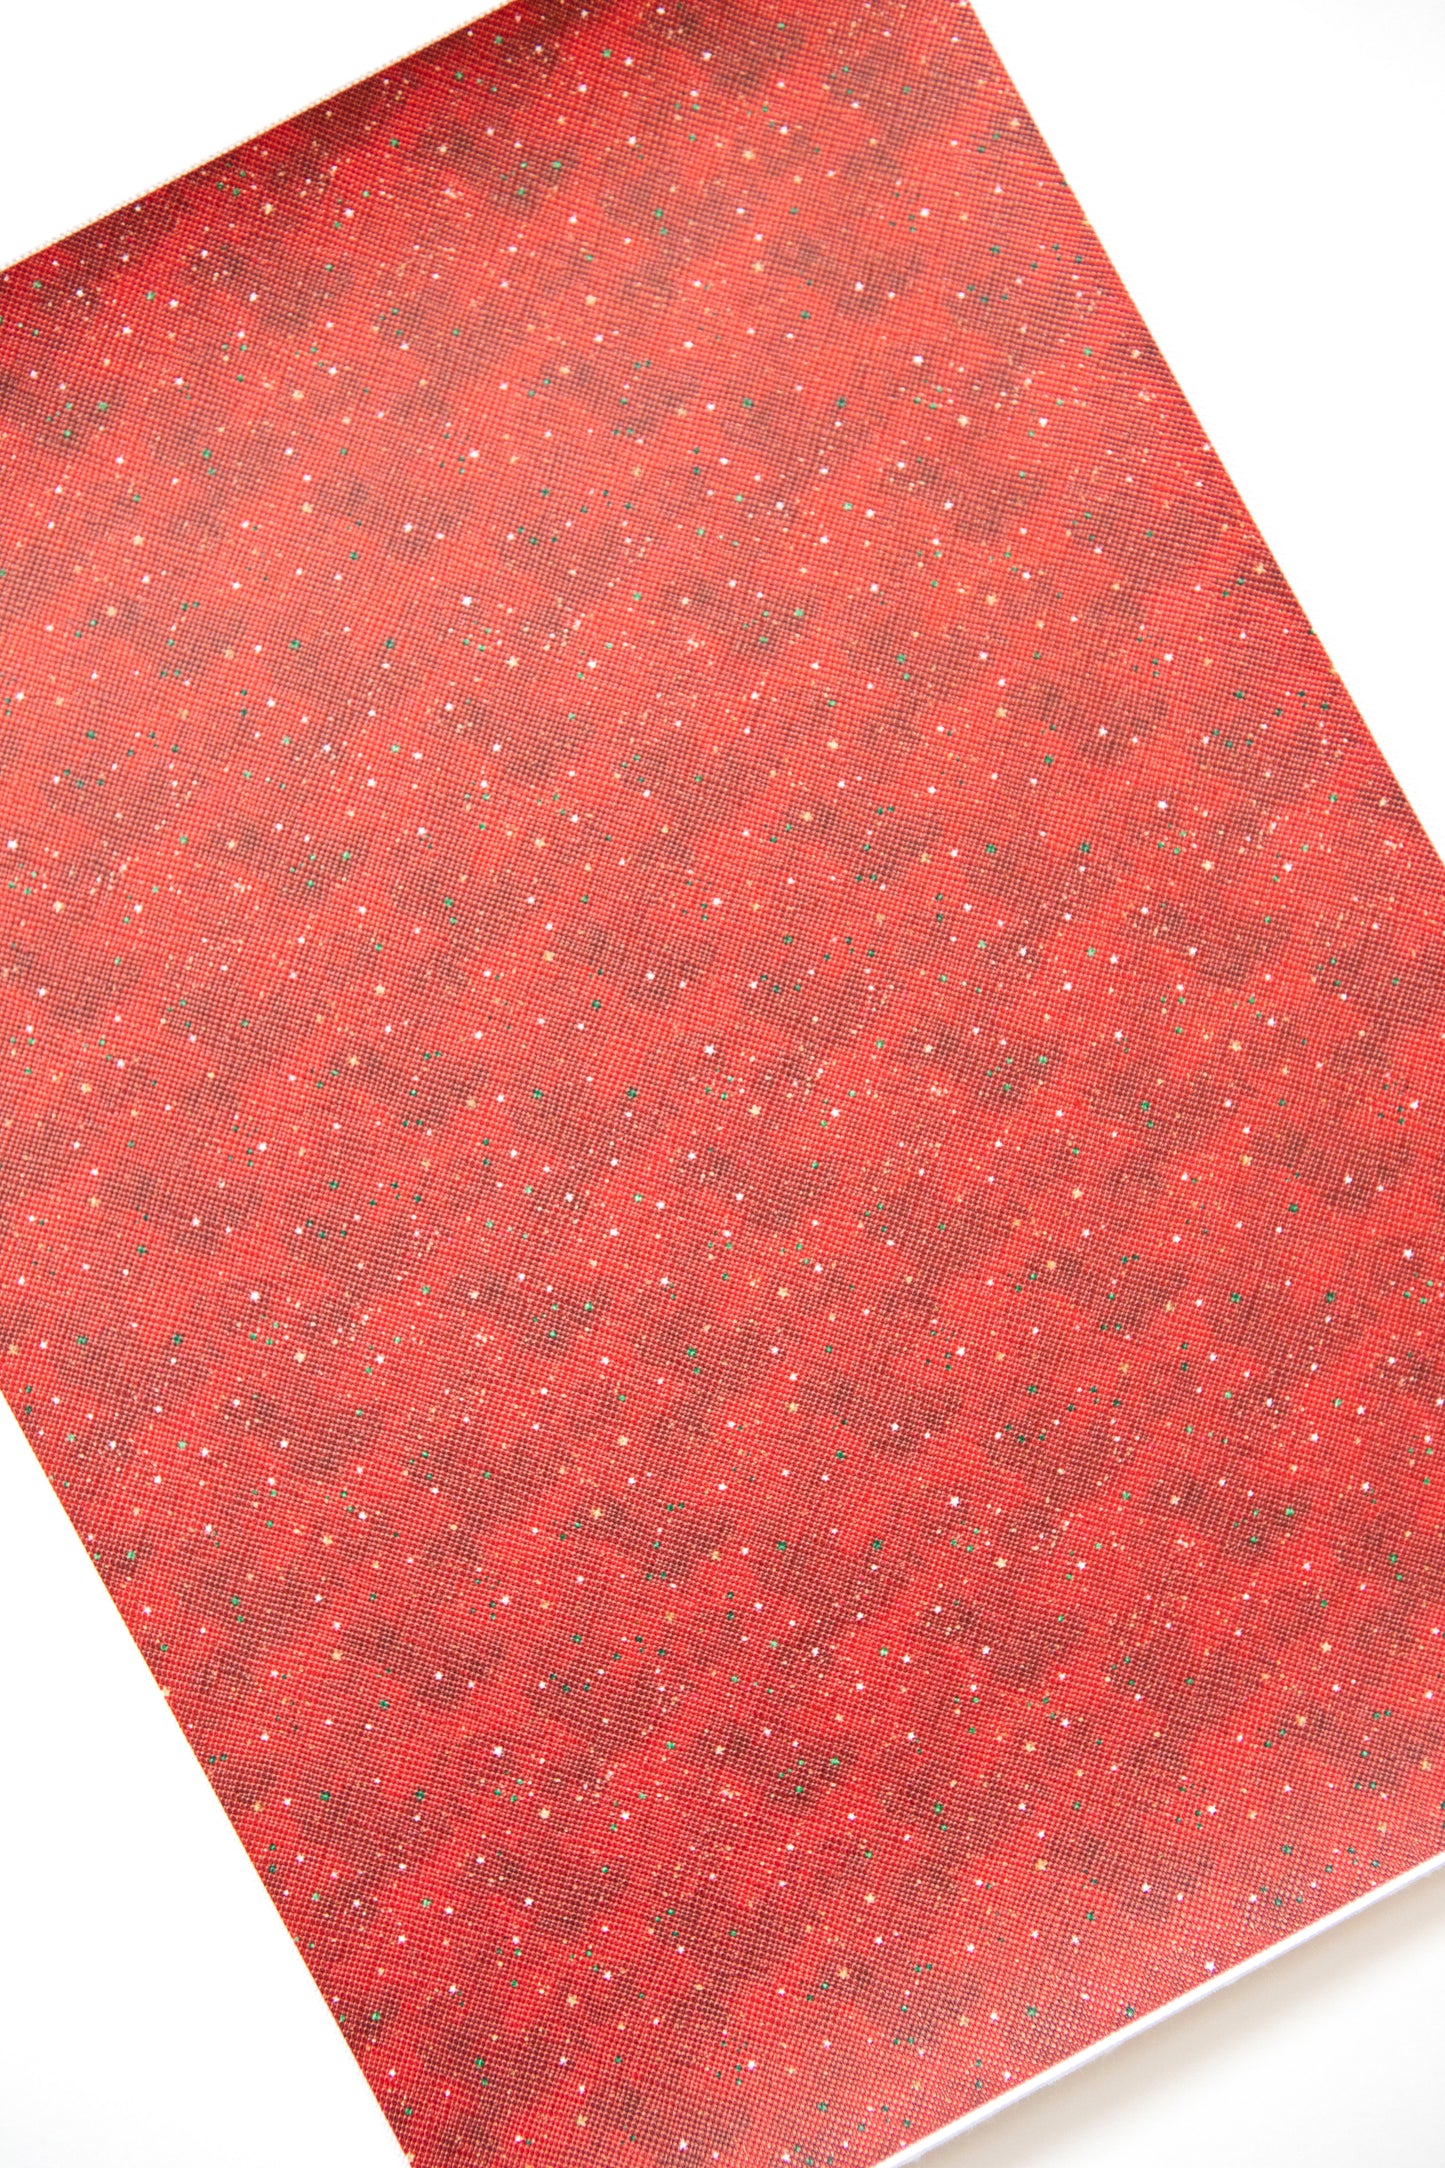 Red Speckle 9x12 faux leather sheet